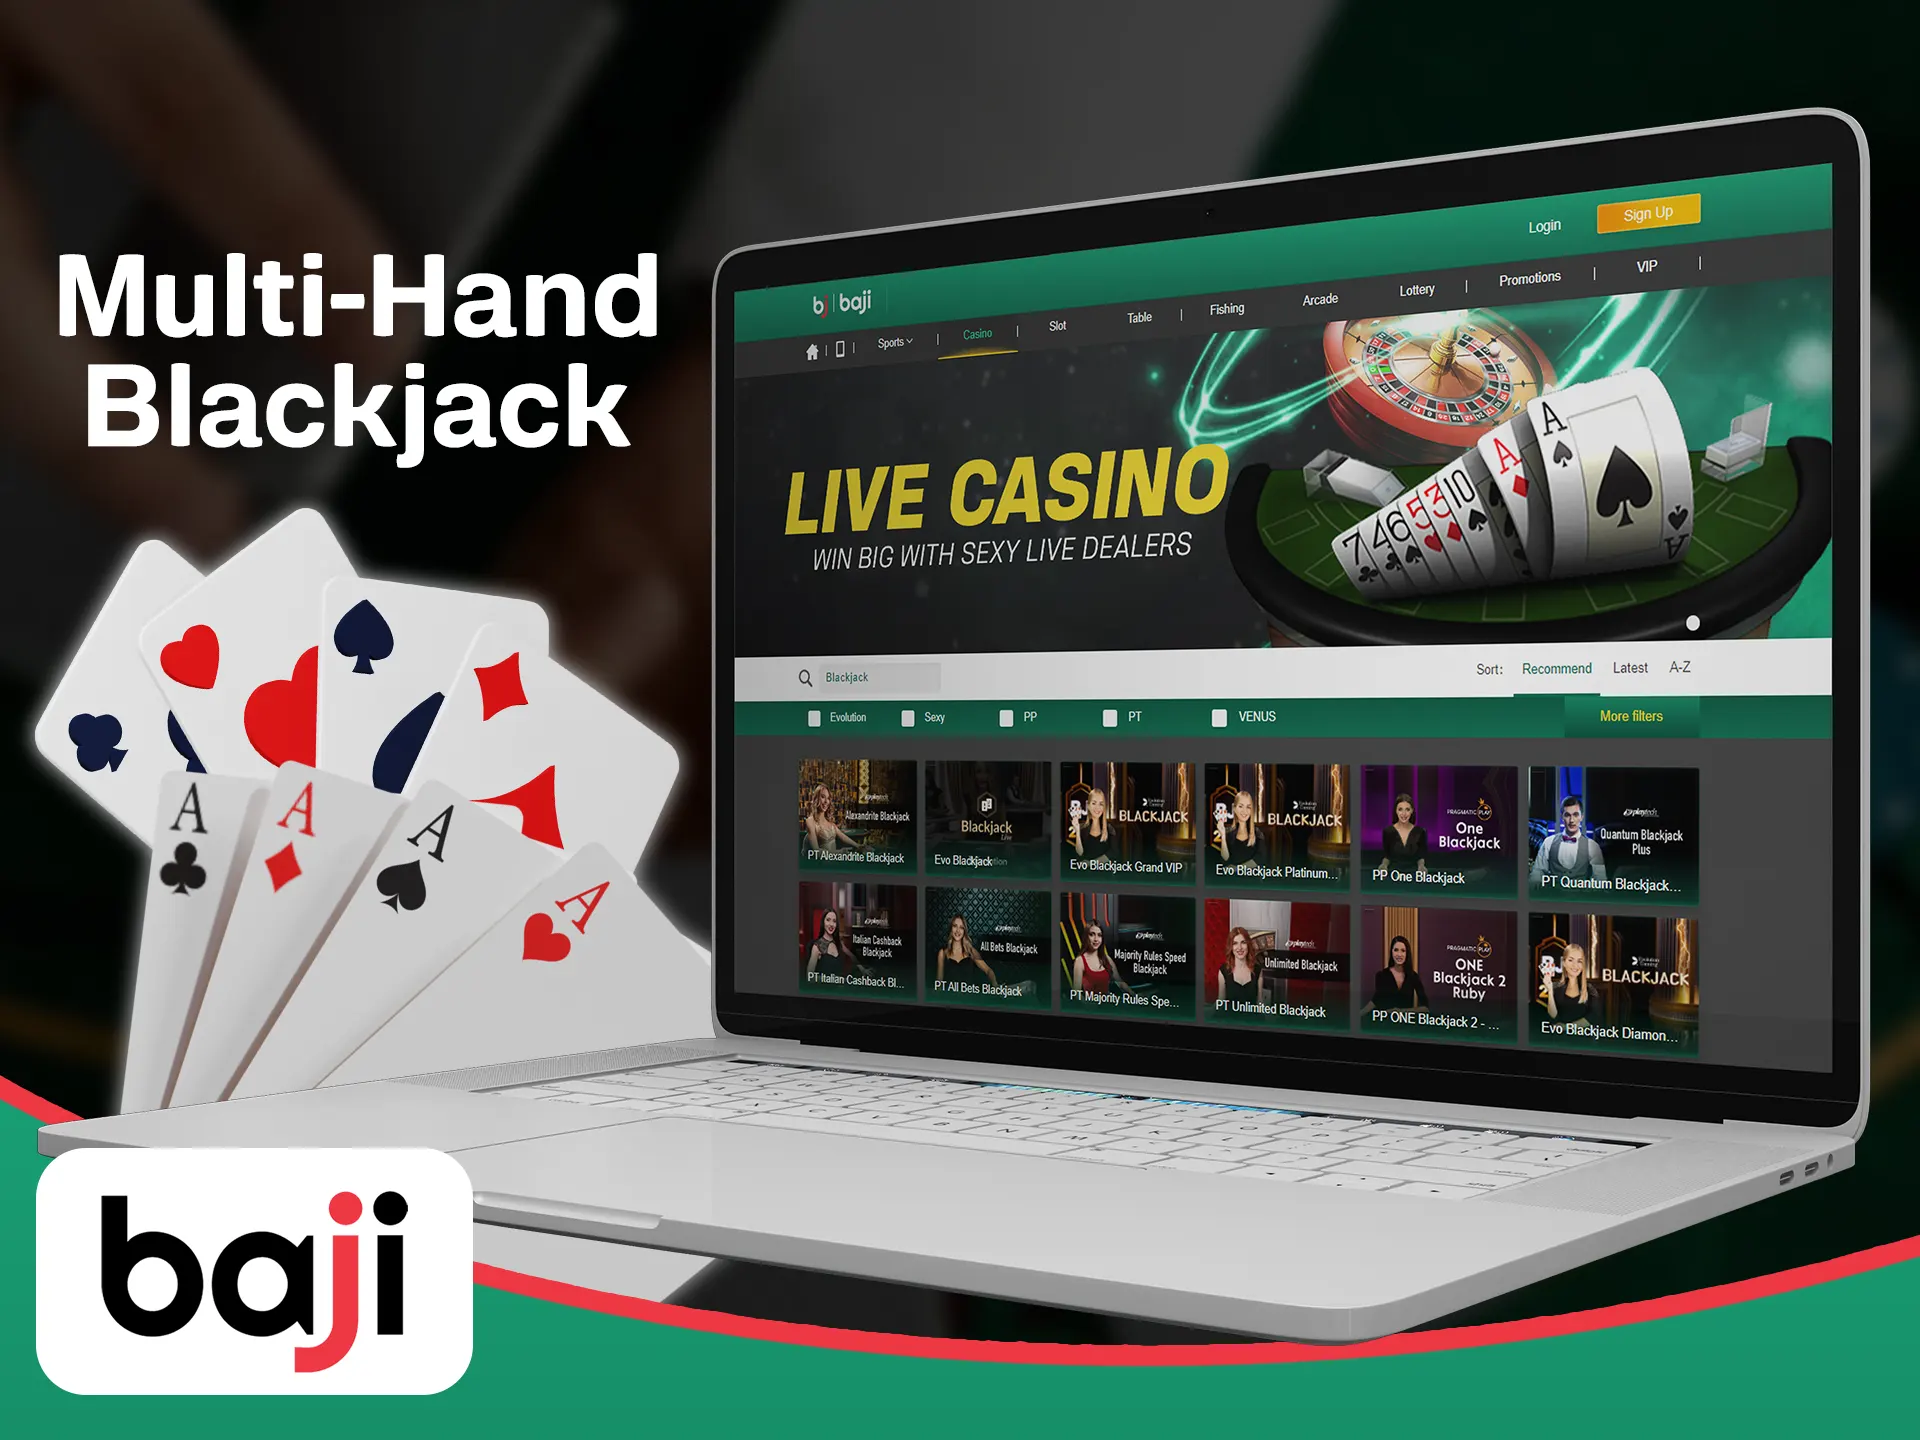 Play blackjack with multiple hands at the Baji.